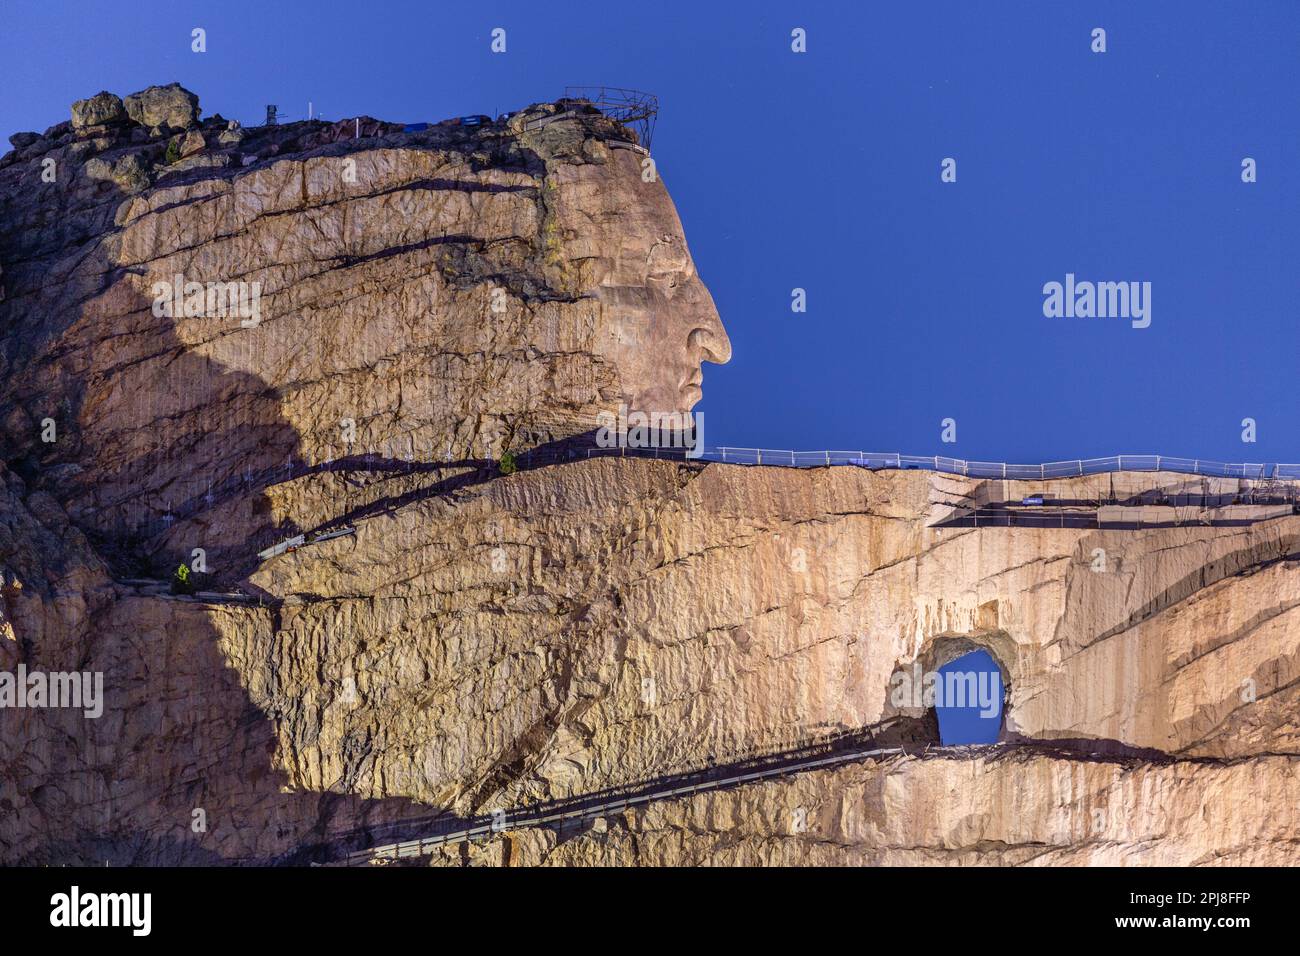 Crazy Horse Memorial at dusk with flood lights, Black Hills, South Dakota, United States of America Stock Photo